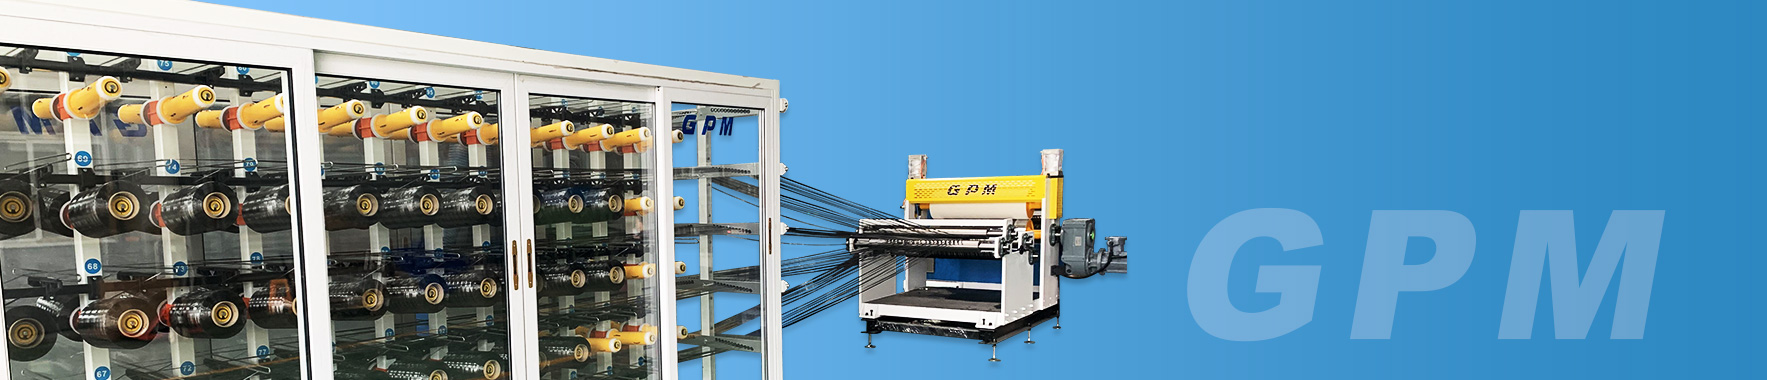 1270mm PA66 (Polyamide or Nylon) Continuous Fiber Reinforced Thermoplastic UD Tapes Production Line;